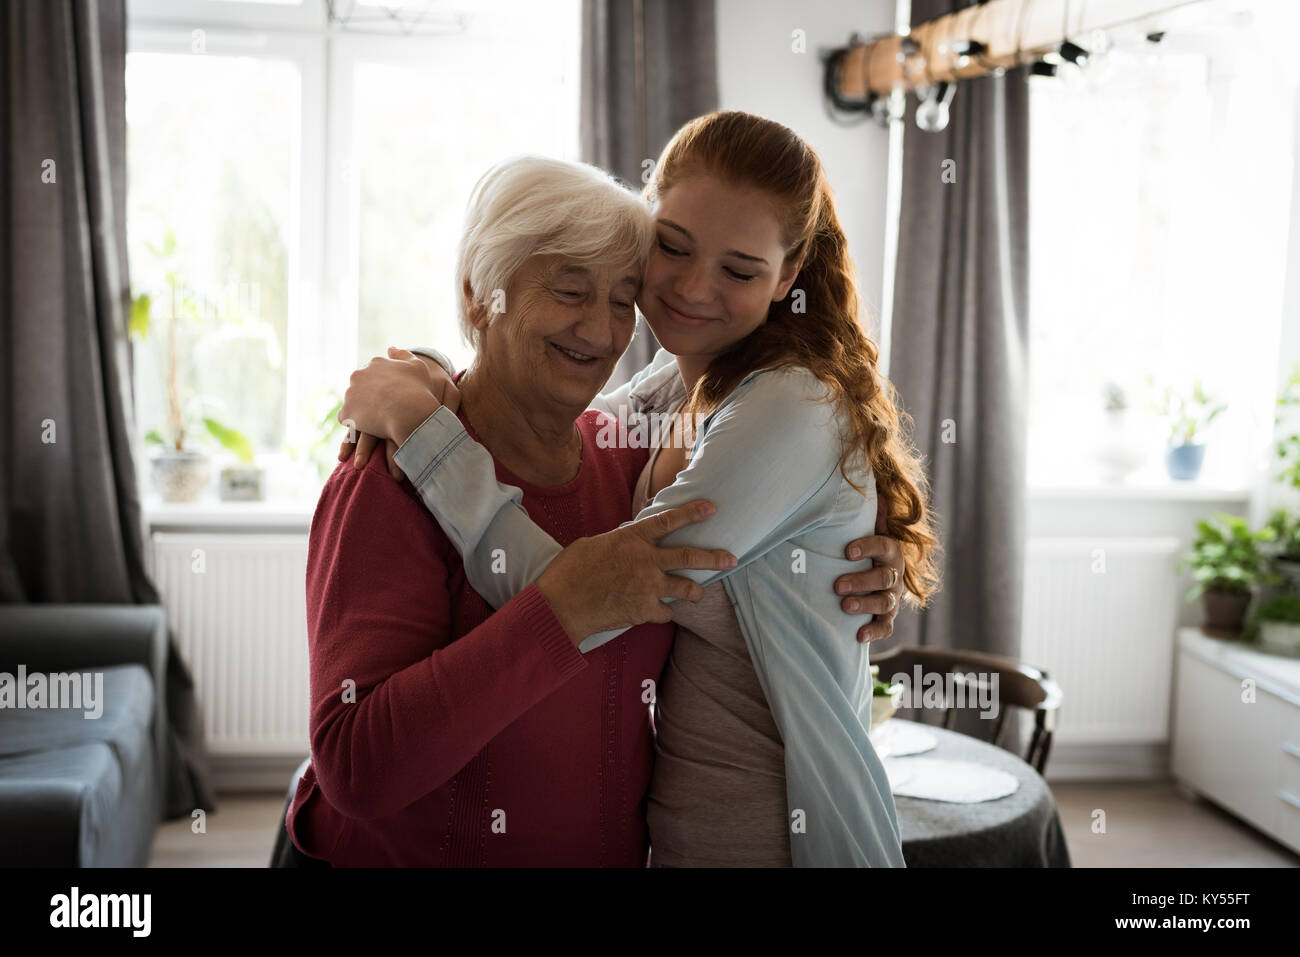 Grand mother and grand daughter embracing each other Stock Photo